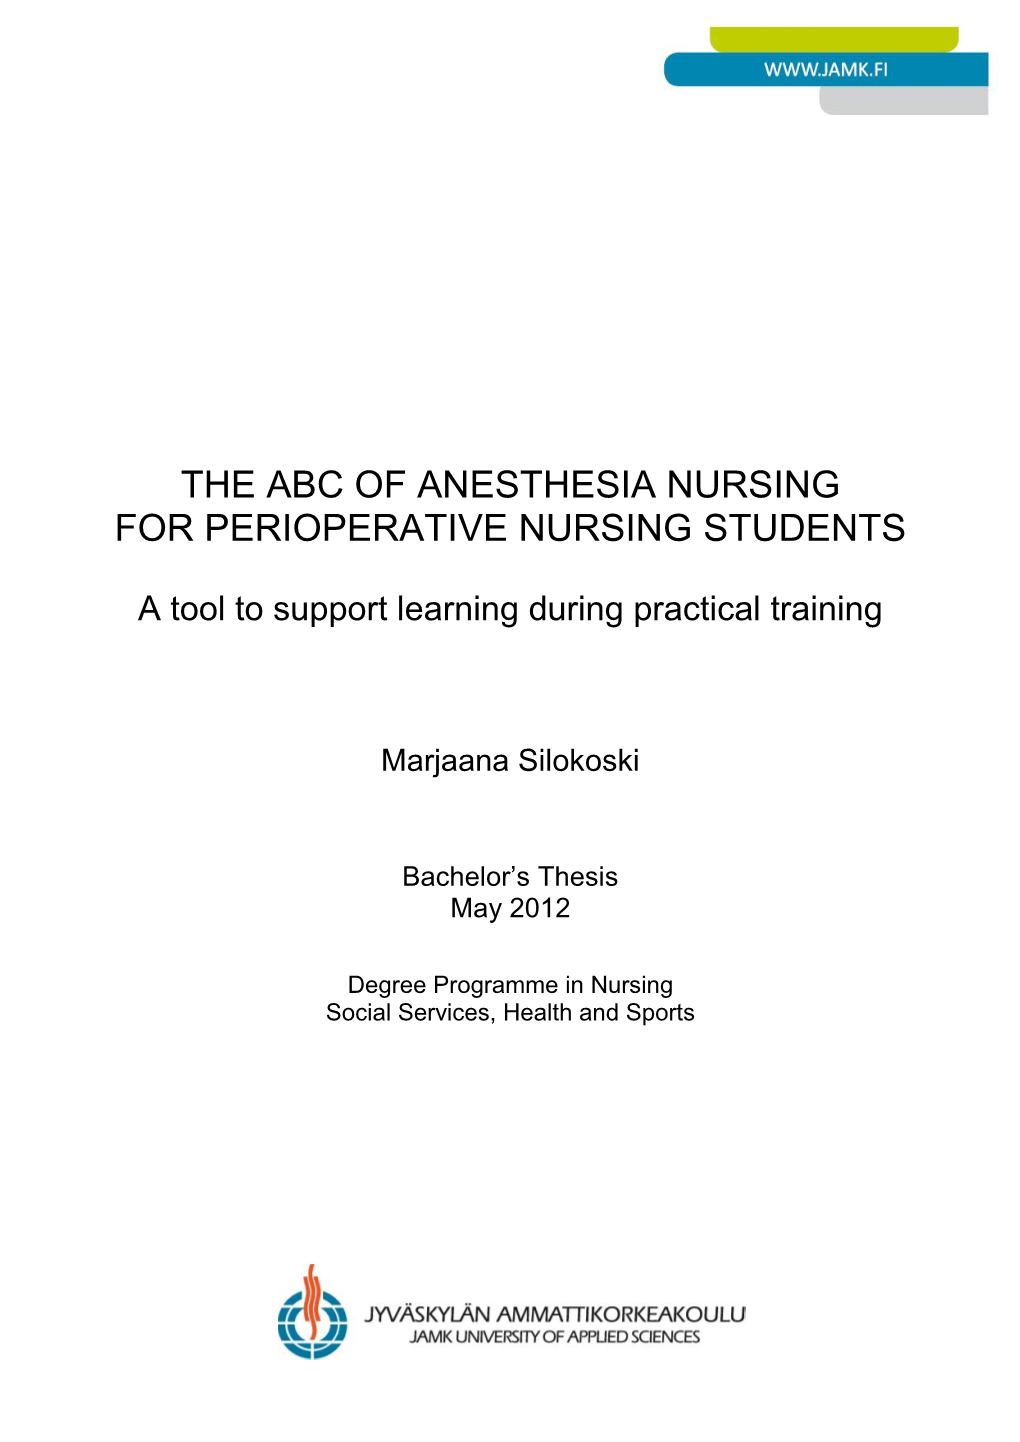 The Abc of Anesthesia Nursing for Perioperative Nursing Students